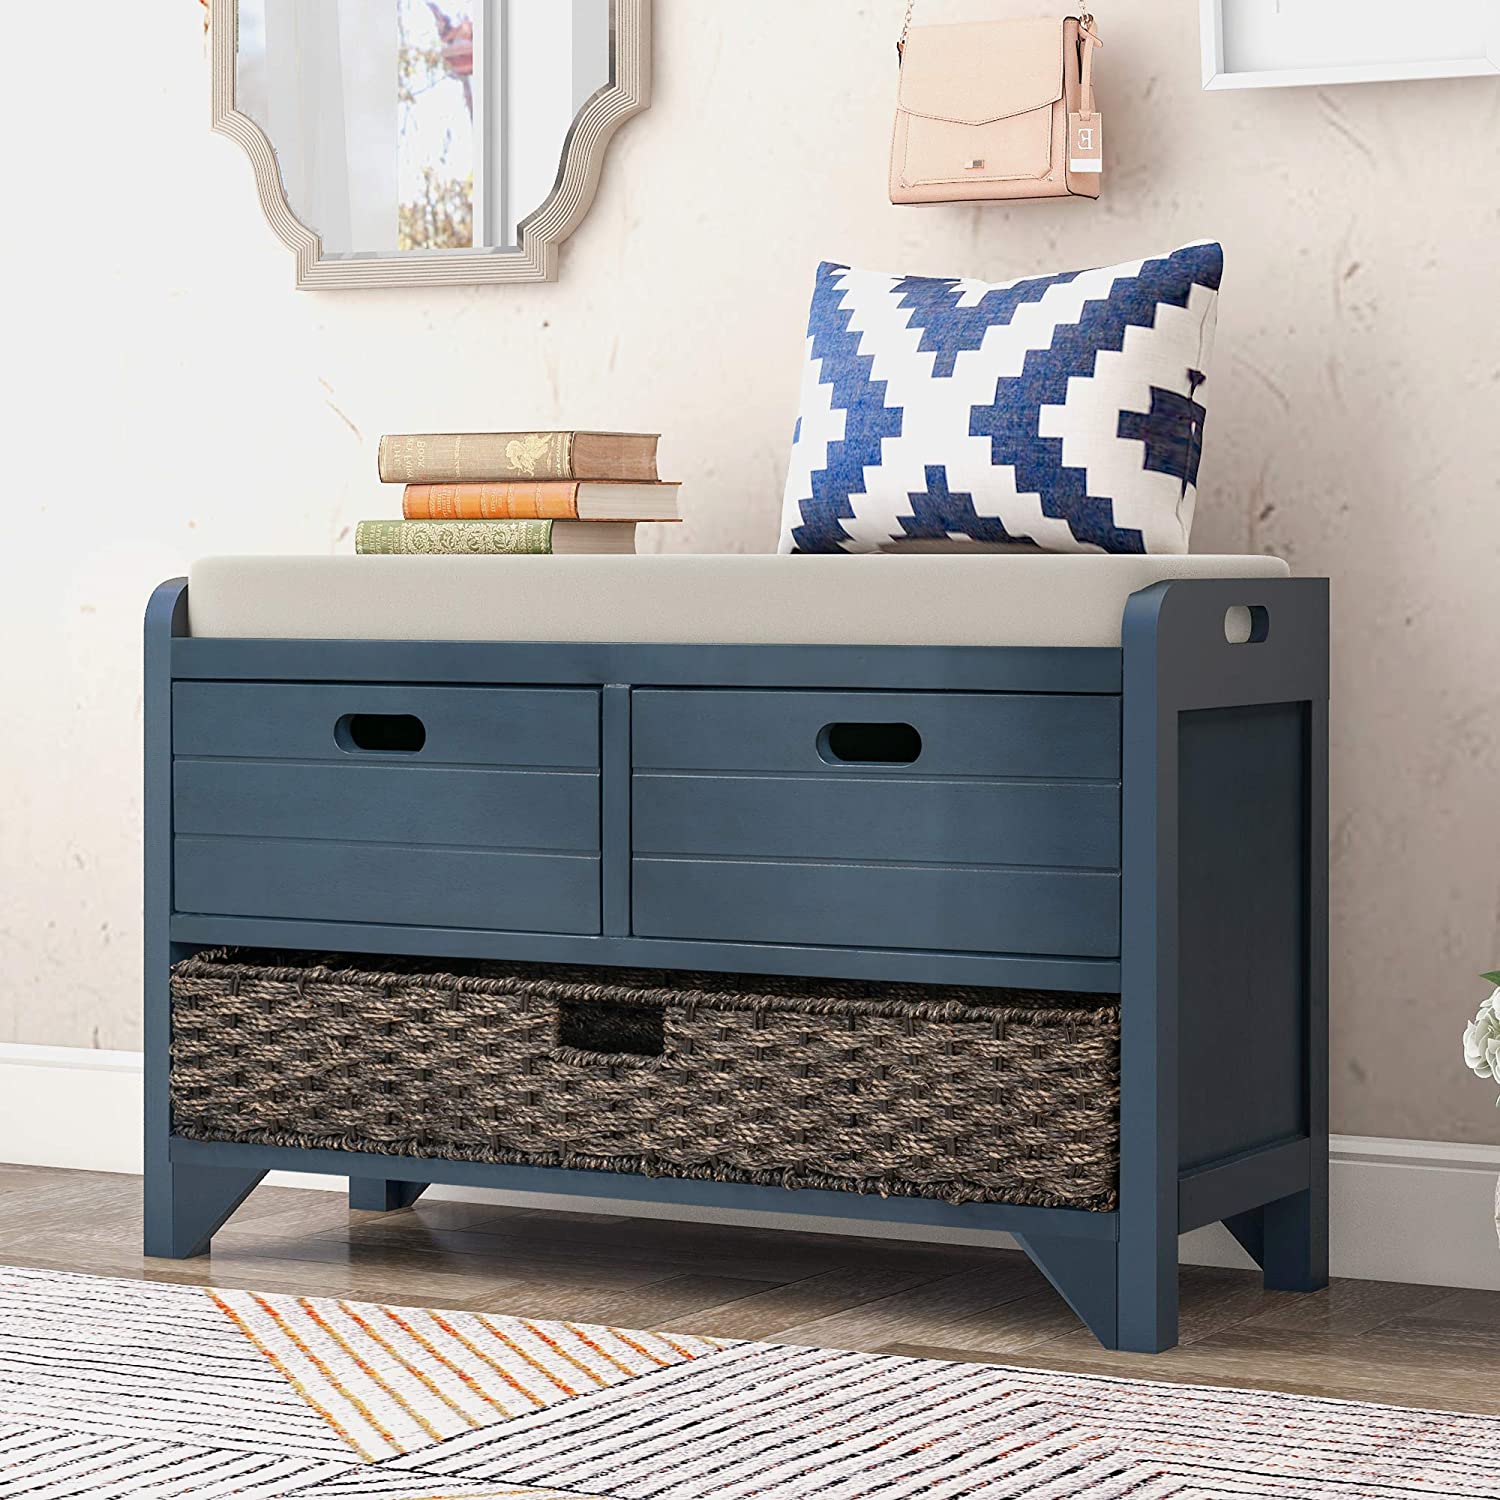 P Purelove Entryway Bench with Removable Basket